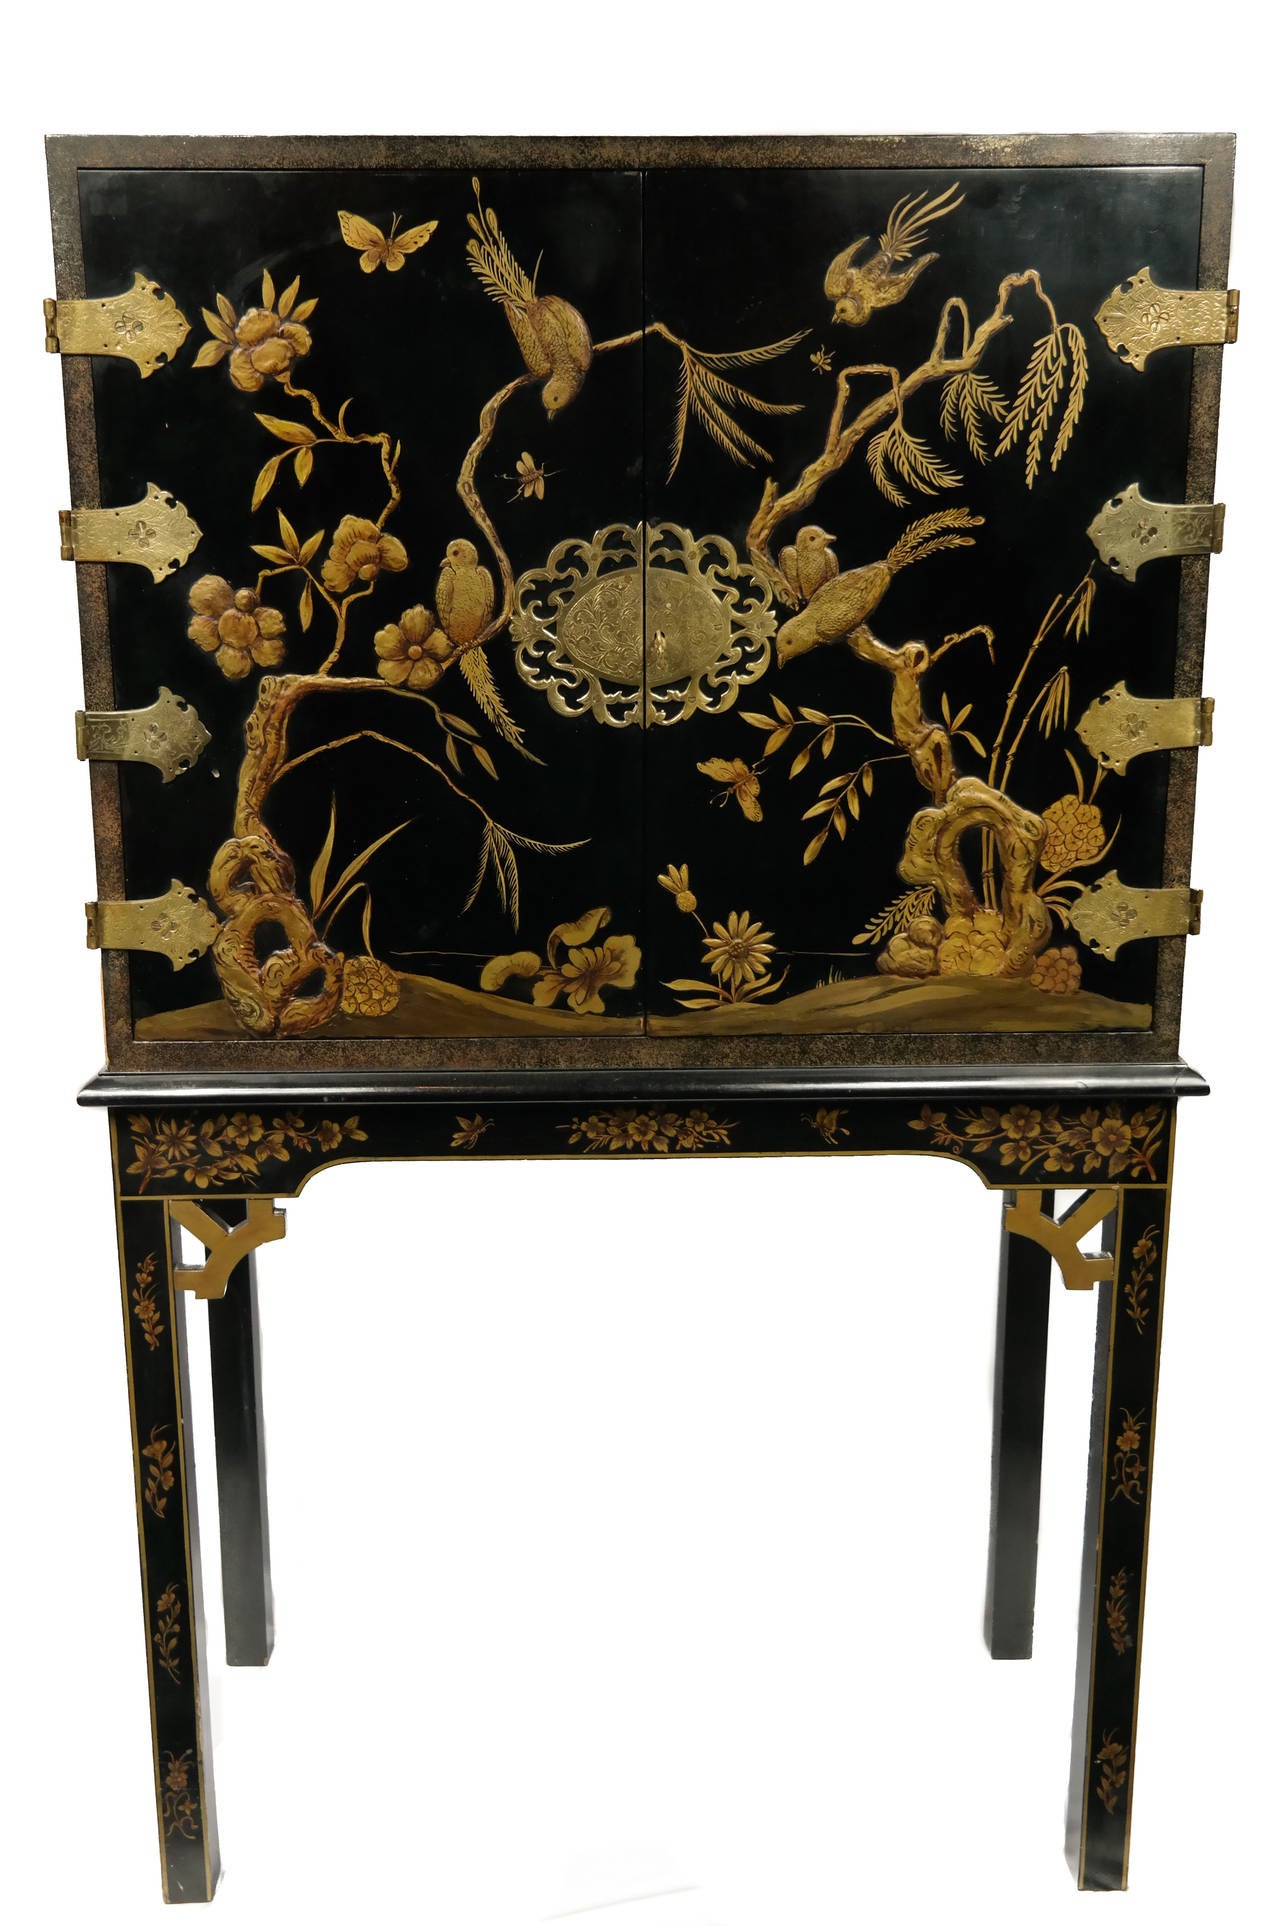 Chinoiserie Drinks Cabinet of the Highest Quality, English made, ca. 1920. Dramatic addition to all eclectic interiors.